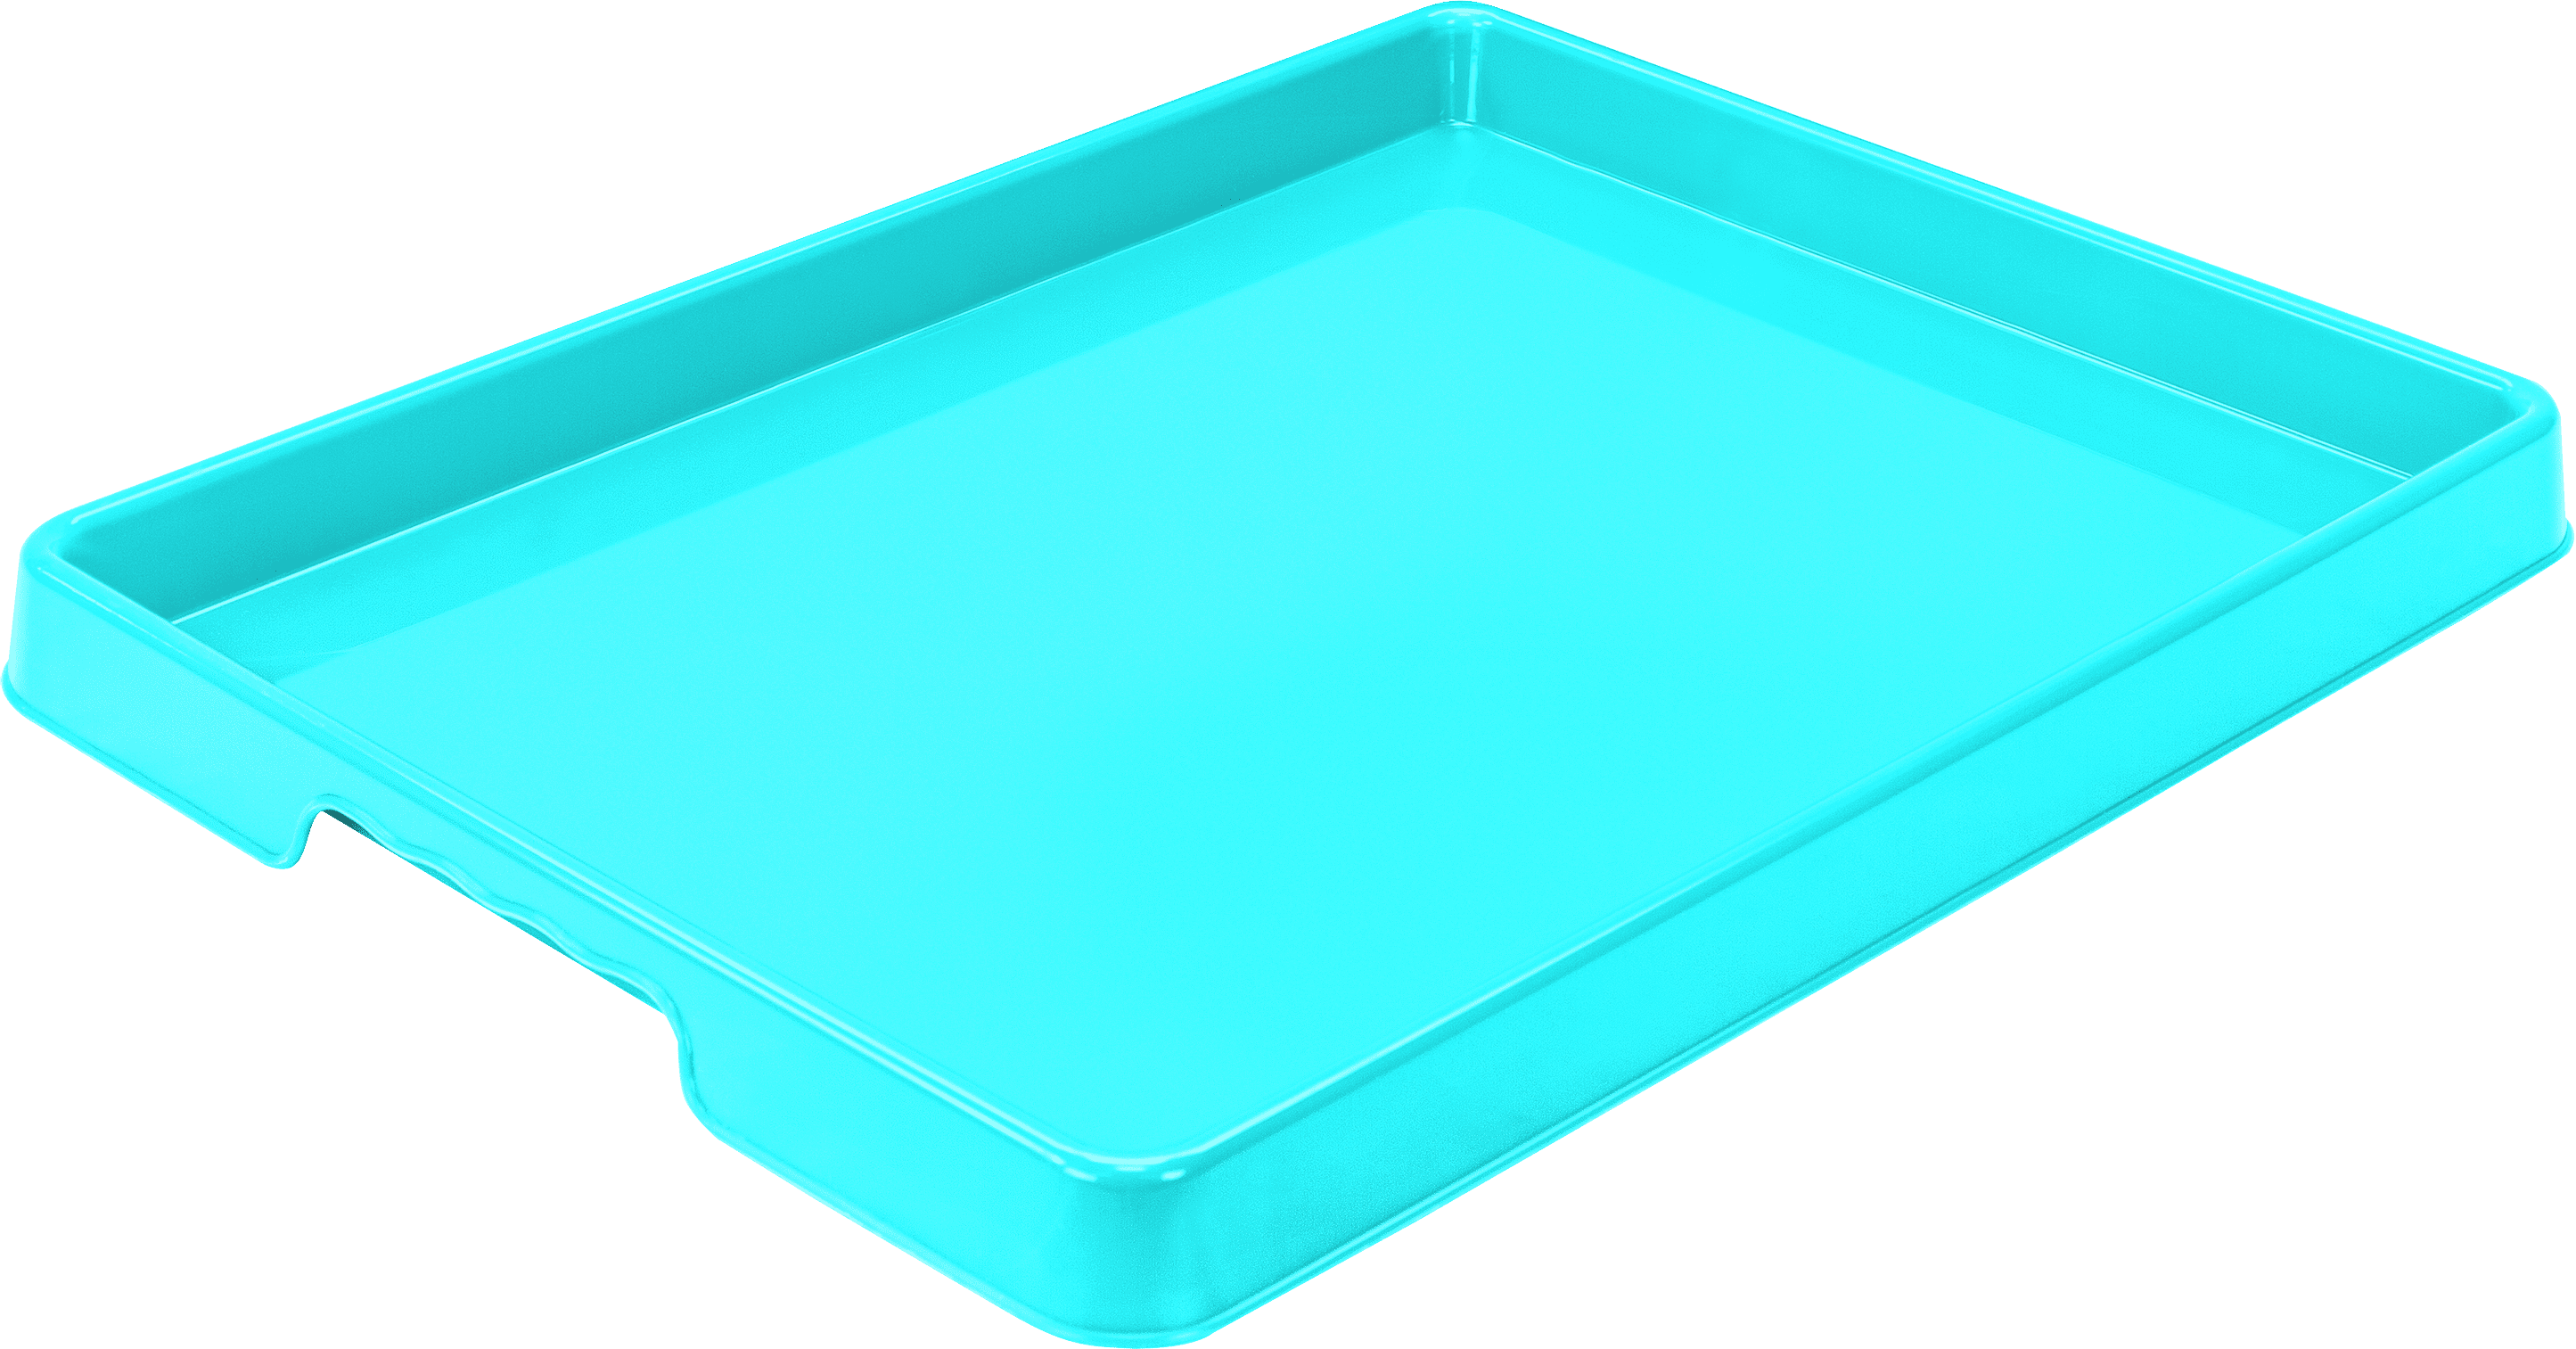 SEHOI 9 Pcs 15.2 x 10.8 inch Large Plastic Craft Trays, Plastic Art Trays Bulk, Plastic Art Trays Large Activity Plastic Tray for Beads, Sand, Paint